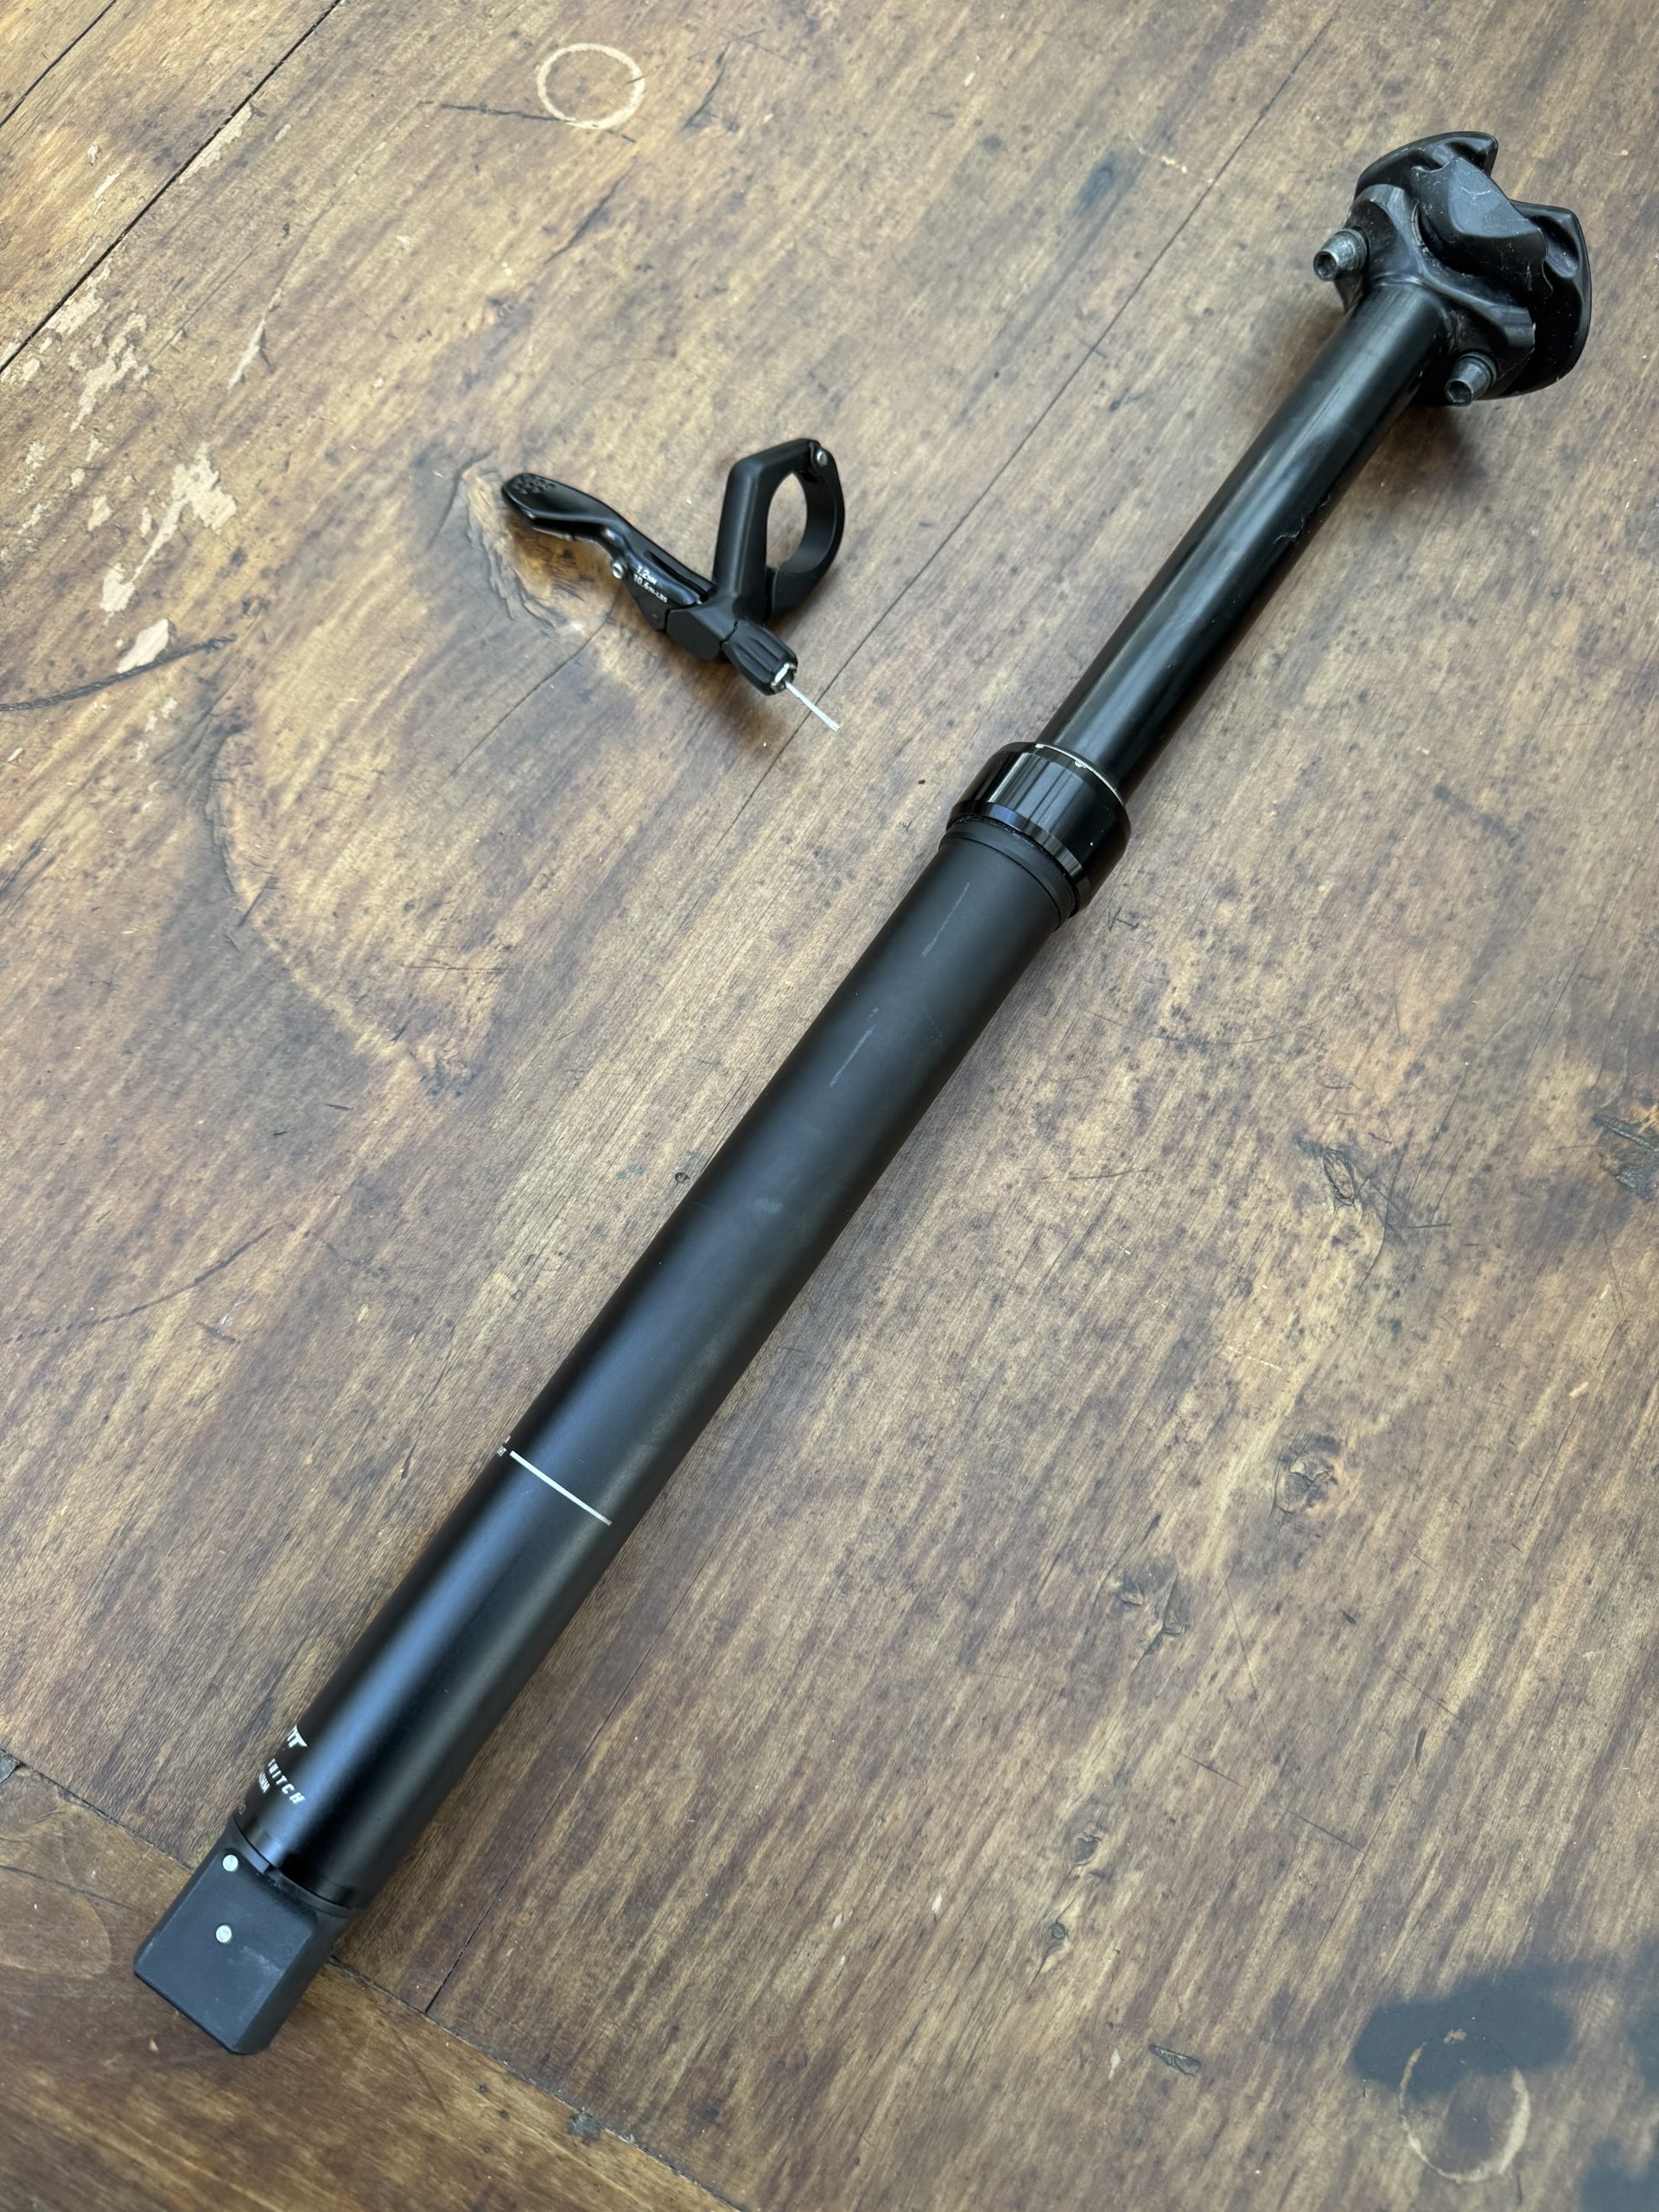 Giant Contact Switch Dropper post (30.9mm)